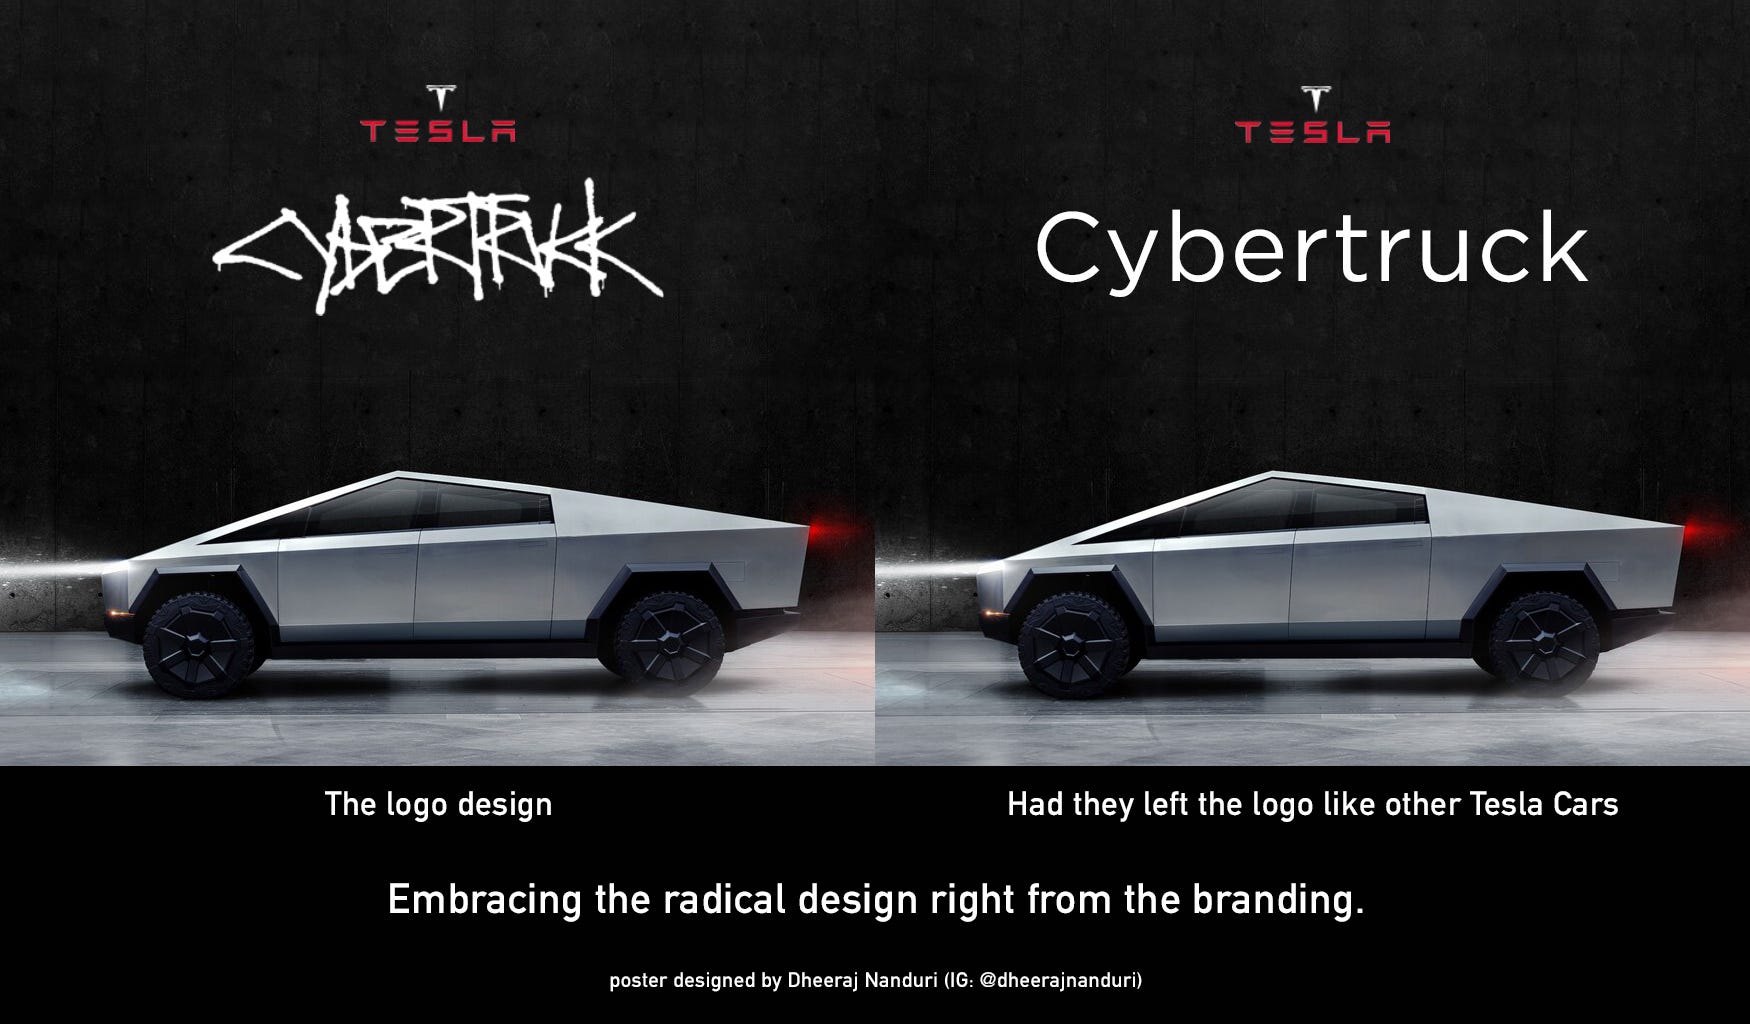 Tesla Cybertruck Interior: How the design has changed in the past